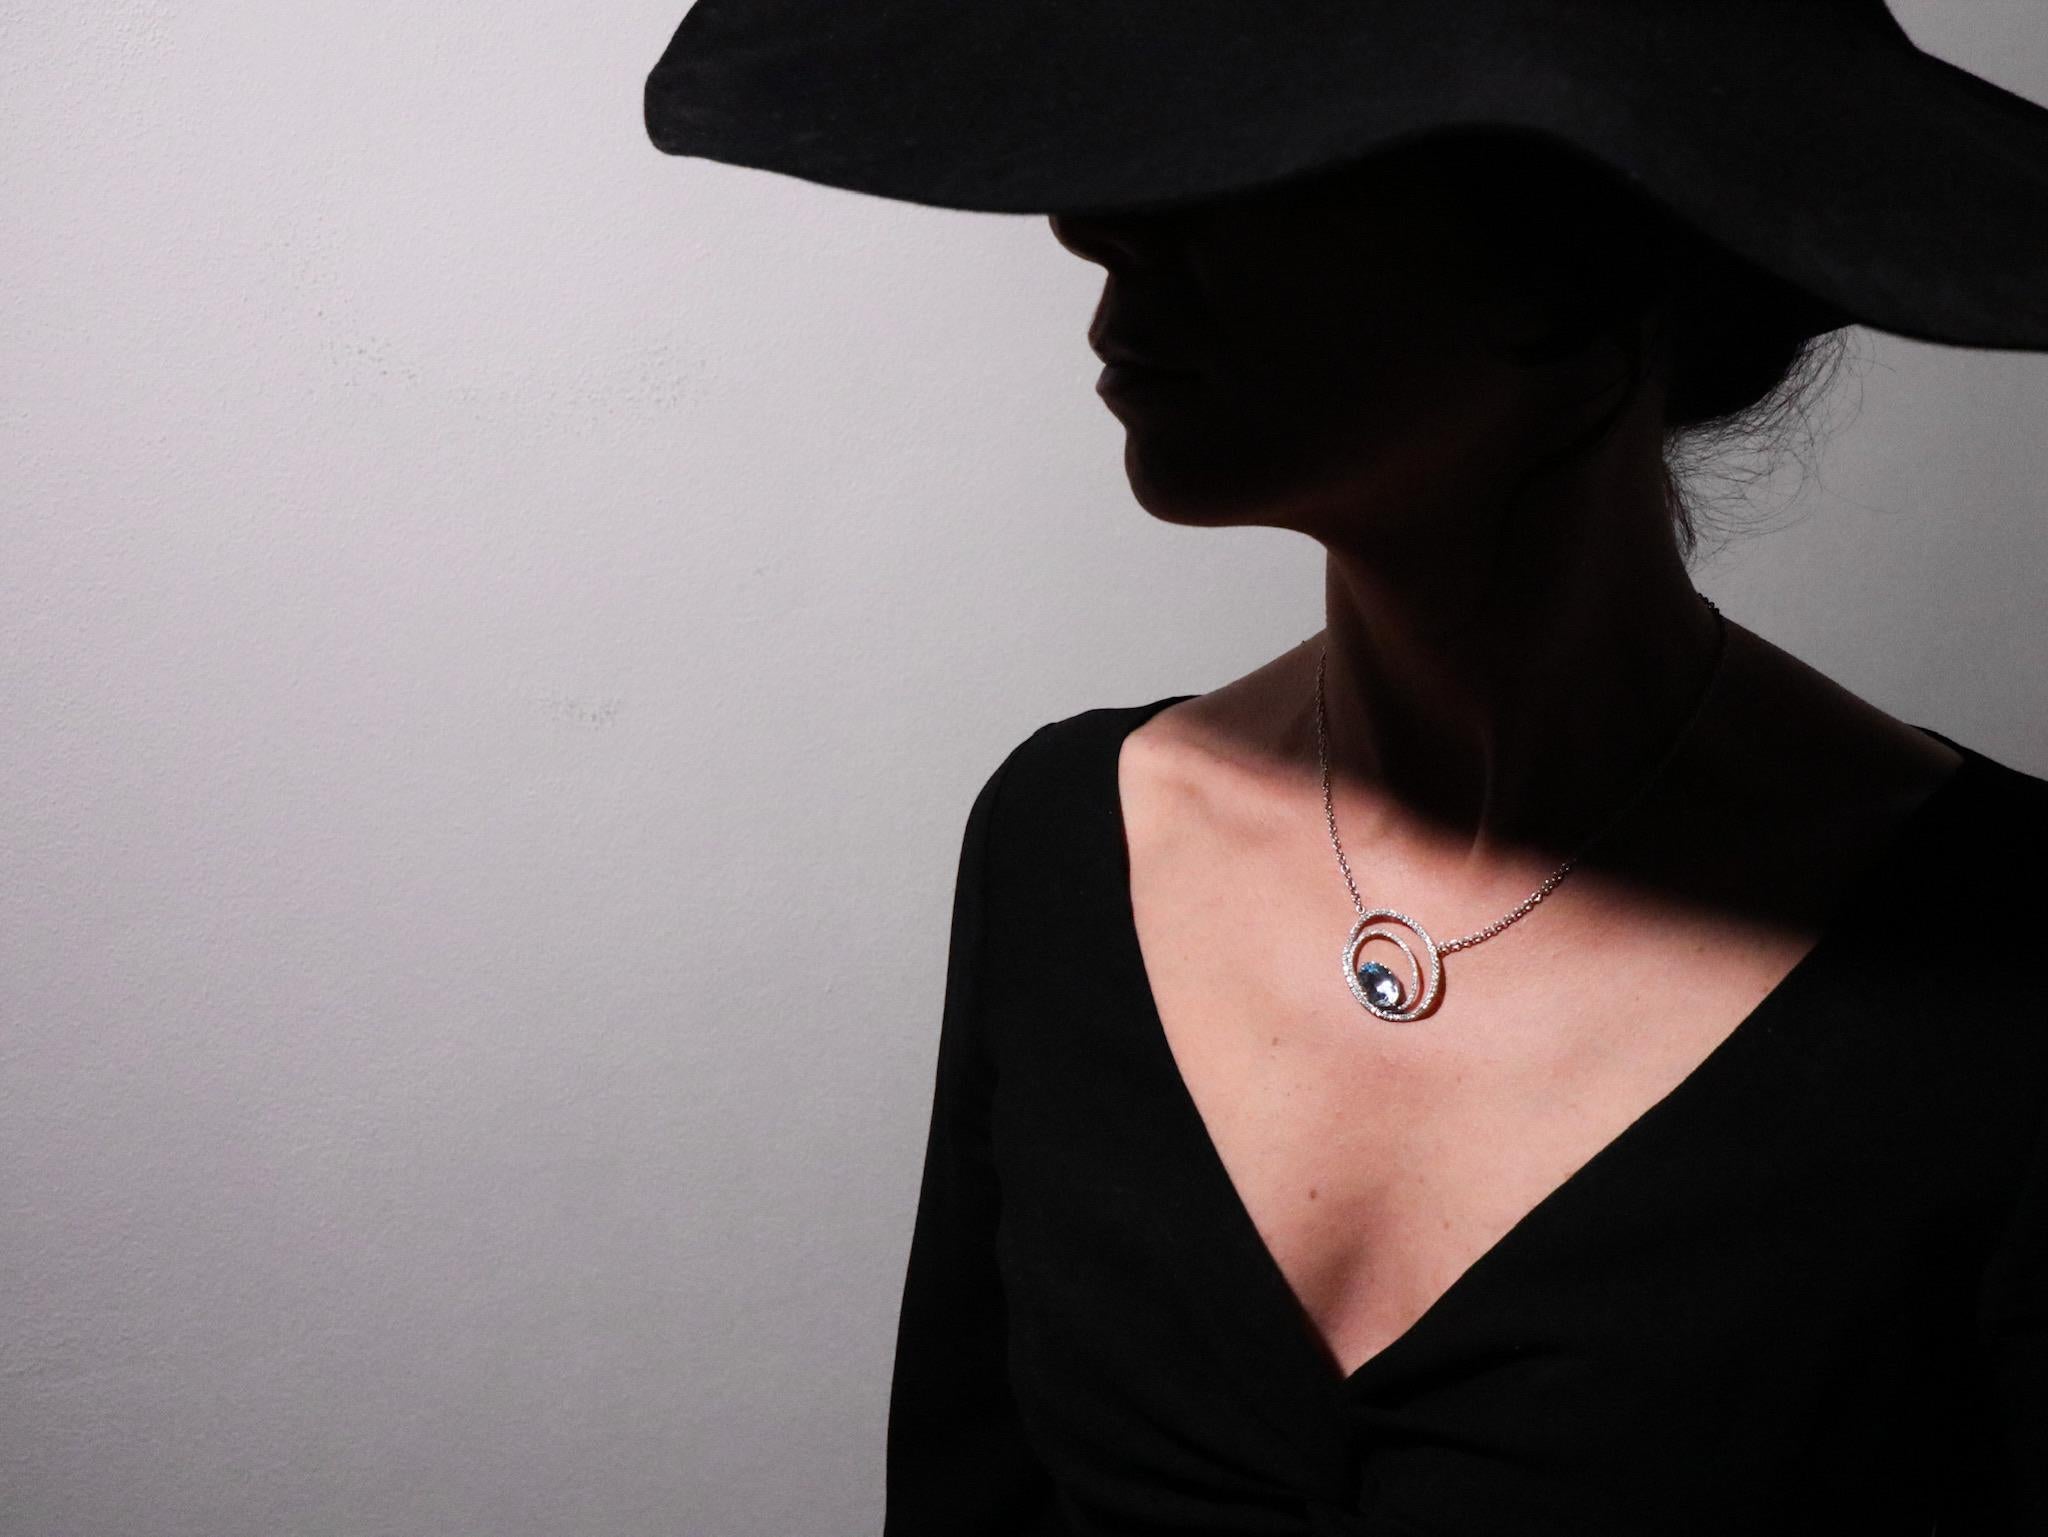 18K Gold Made in Italy Aquamarine Diamond Asymmetrical Cosmic Empowering Pendant.
Enlighten your Beauty with the Saturno Pendant Necklace.
Unlock Your Divine Potential with the Saturno pendant. 
Gems and metal are energetically cleansed to emit